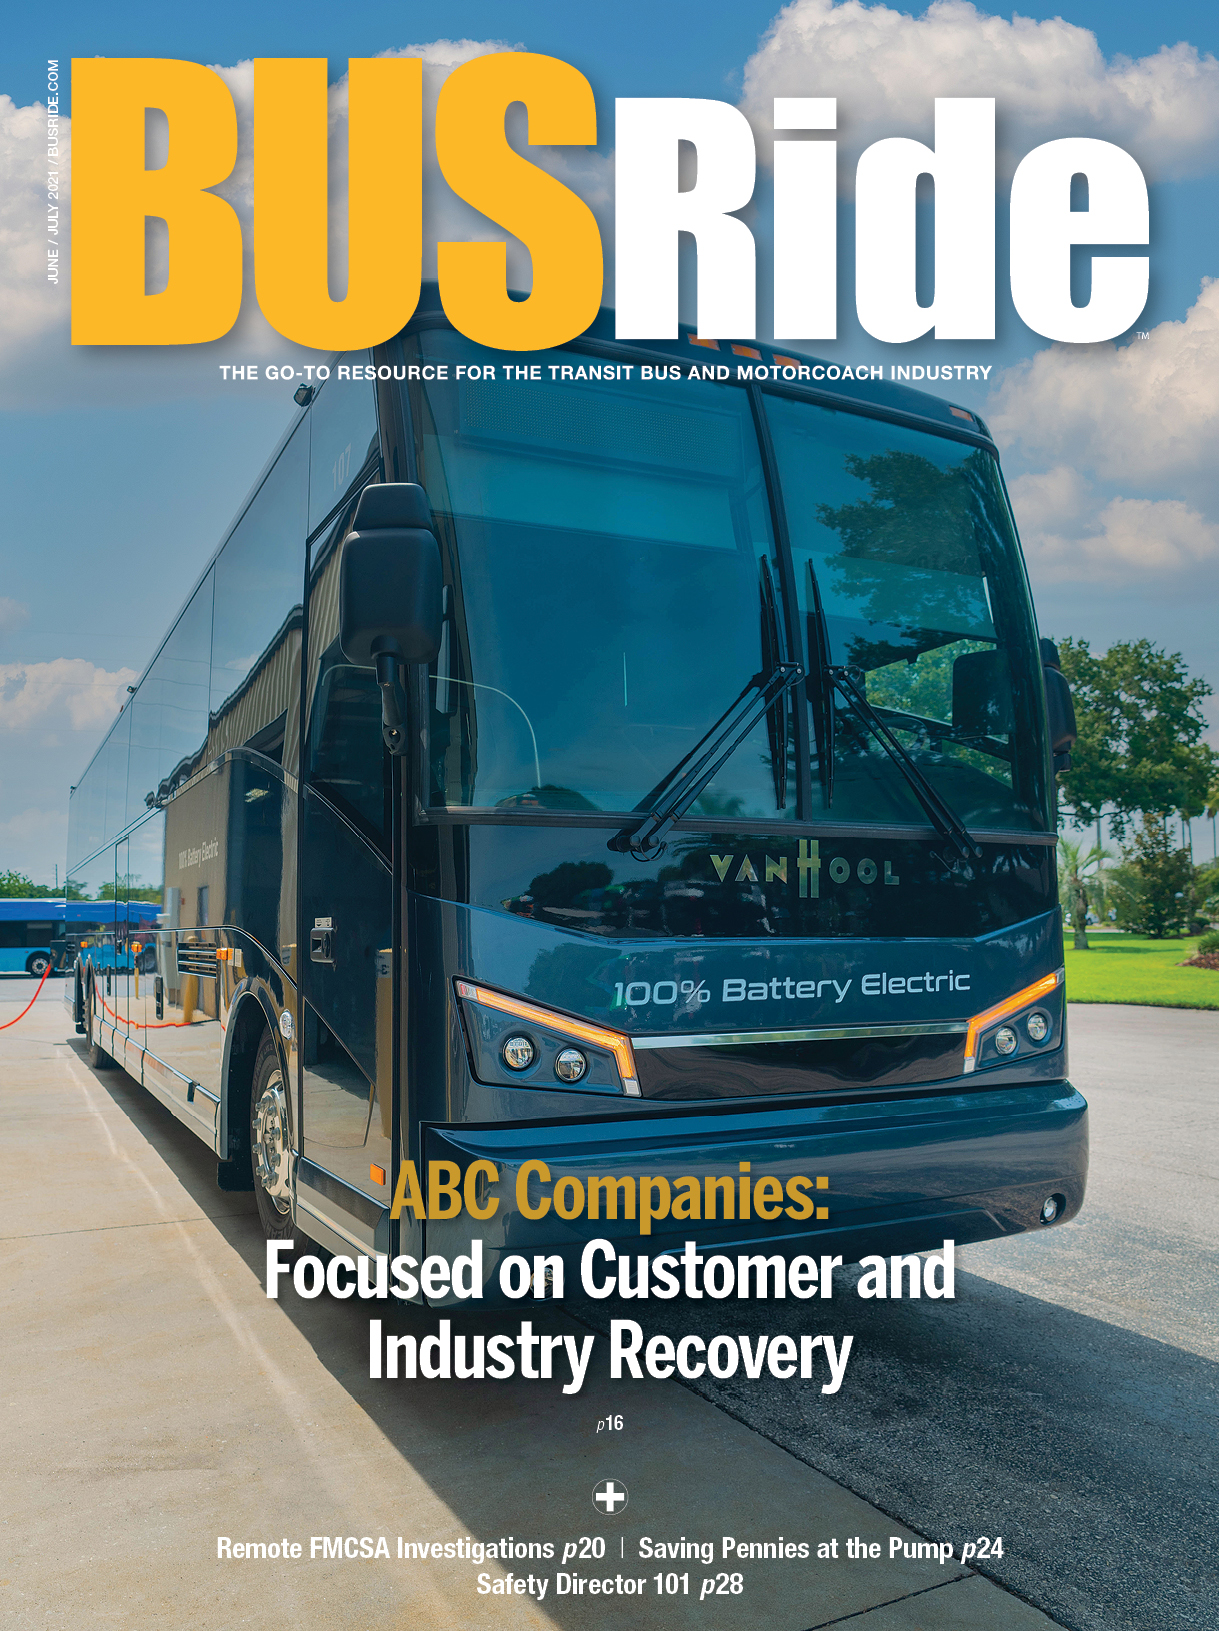 ABC Companies: Focused on Customer & Industry Recovery